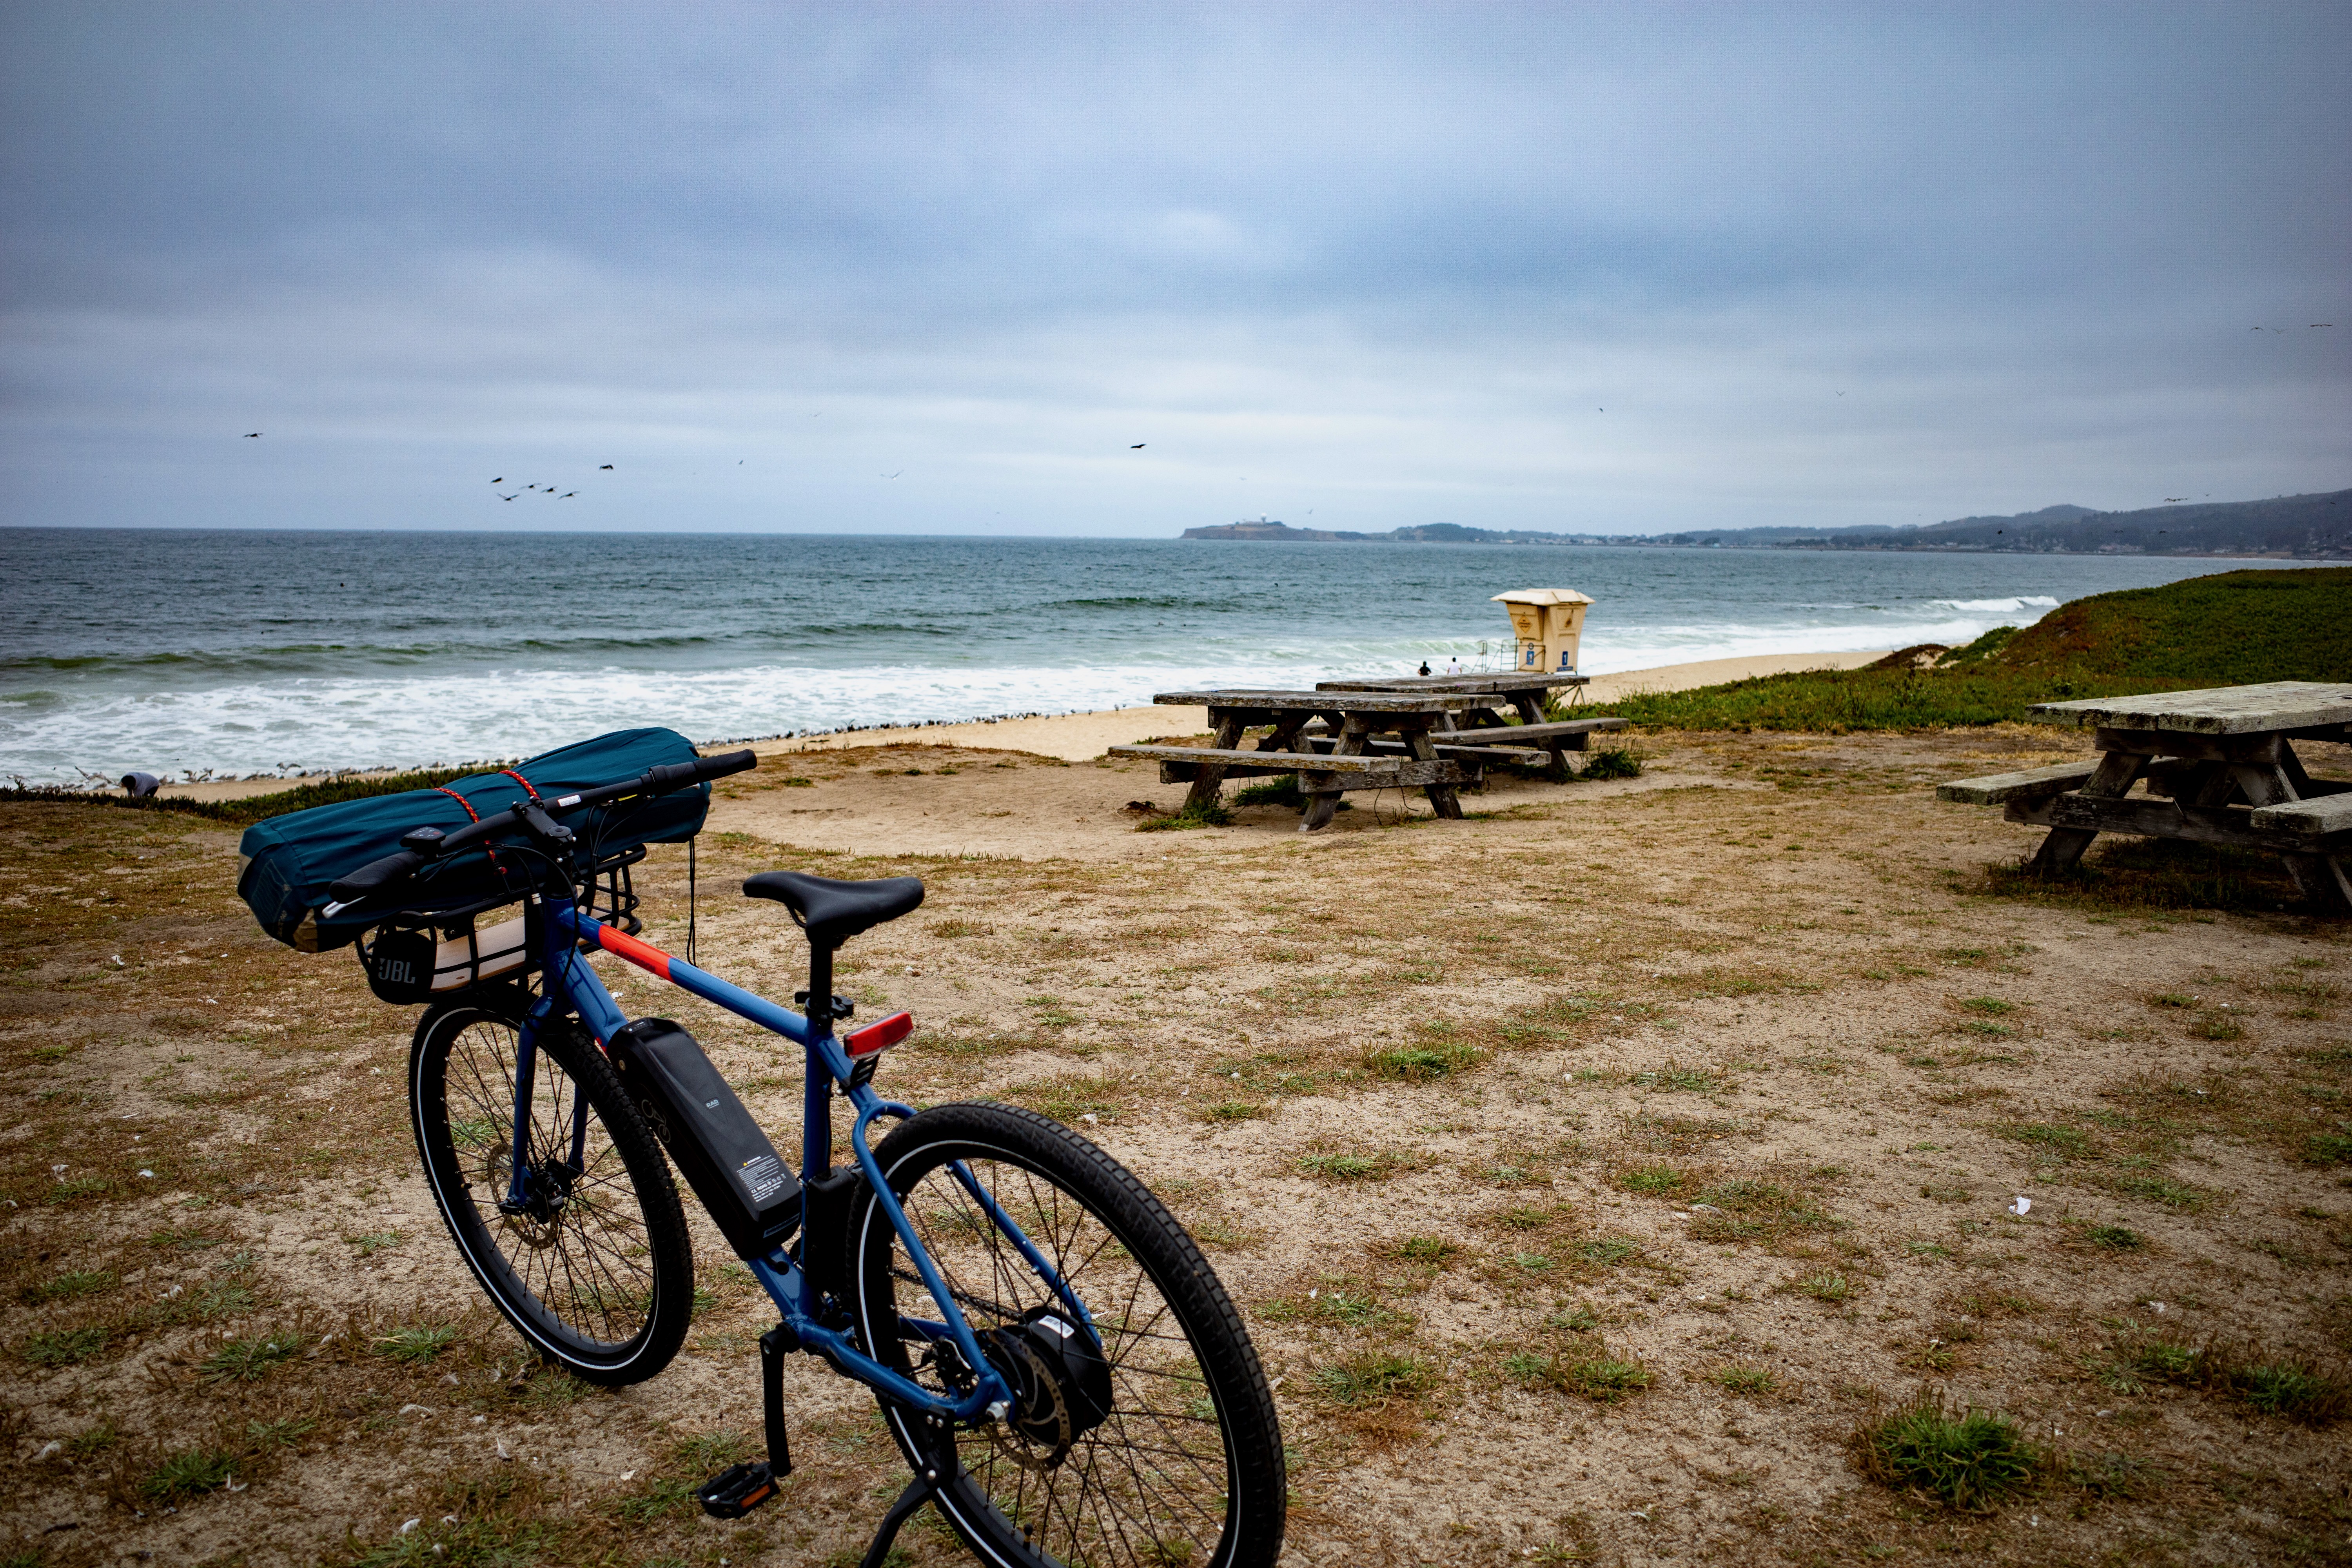 Bike in front of beach view